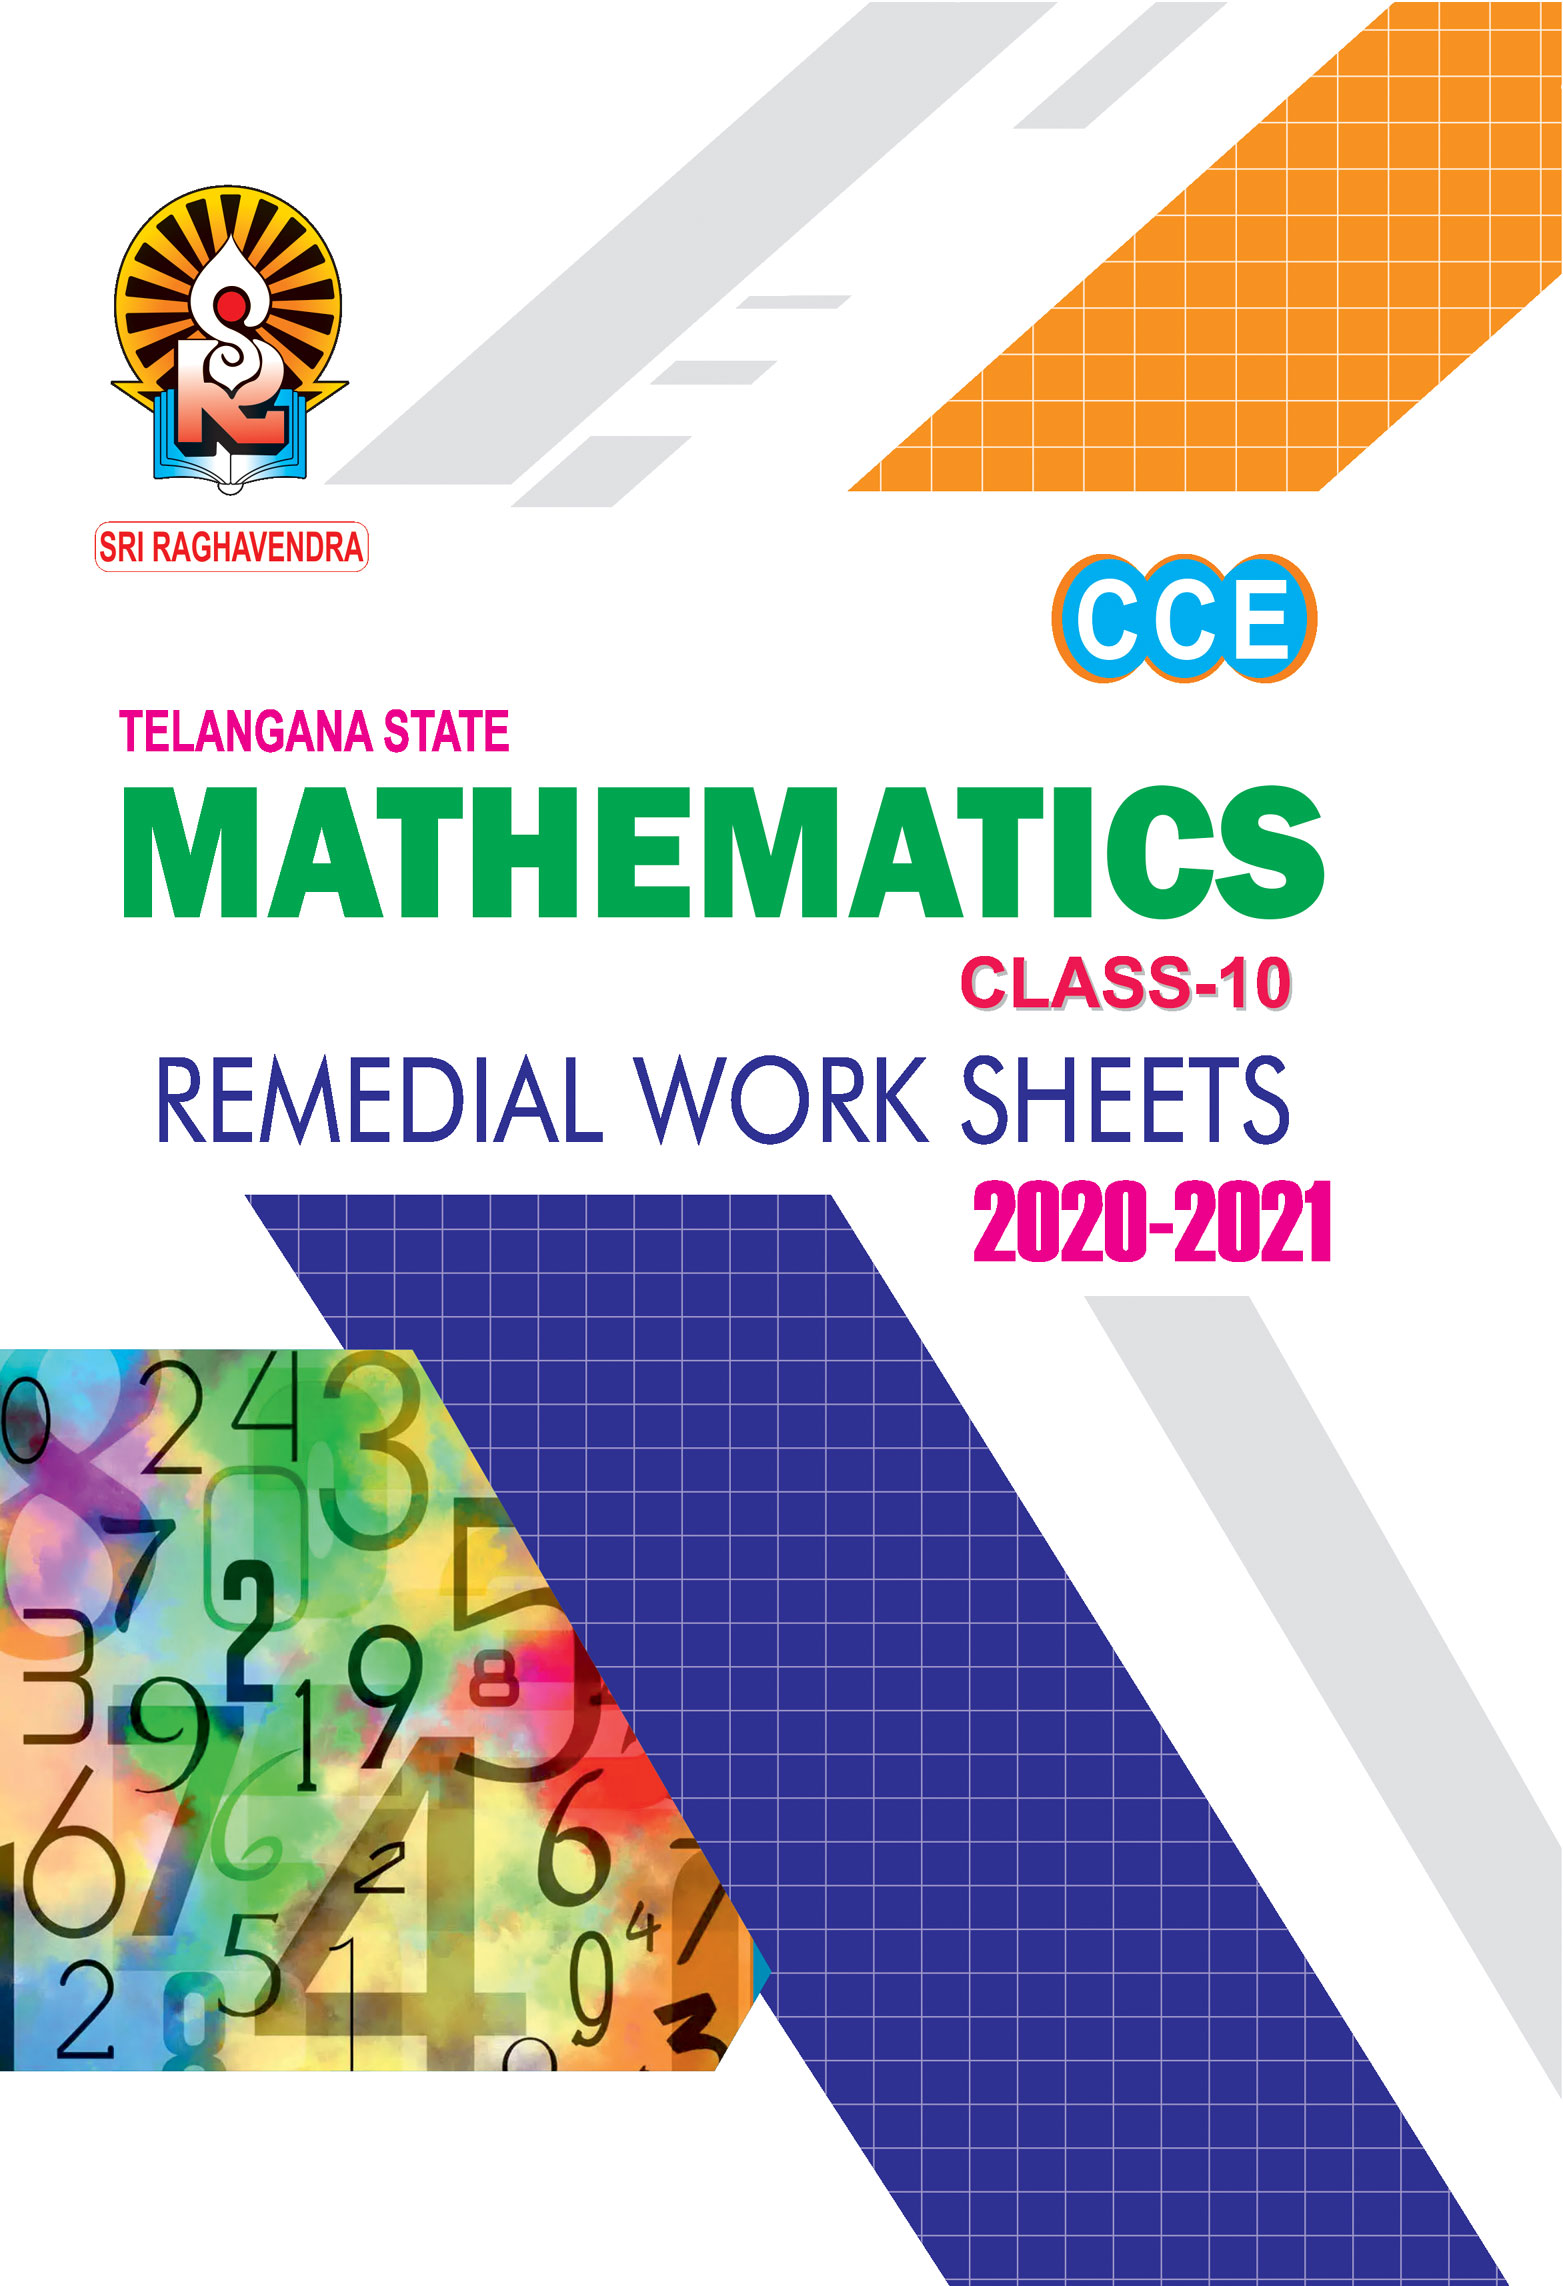 College Remedial Math Worksheets